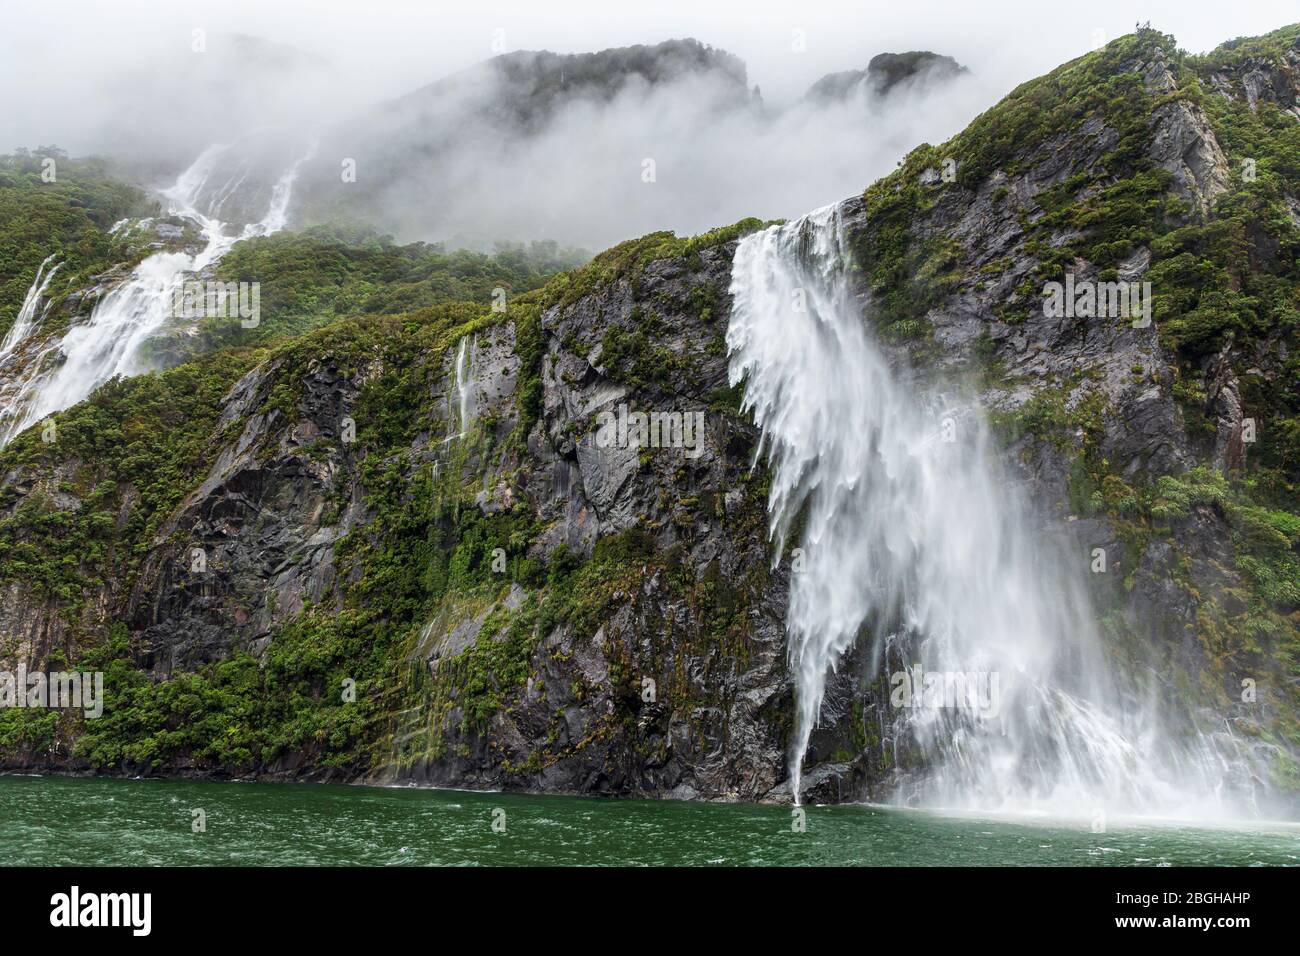 Stirling Falls being blown by the wind on a stormy day, Milford Sound, Fiordland National Park, South Island, New Zealand Stock Photo